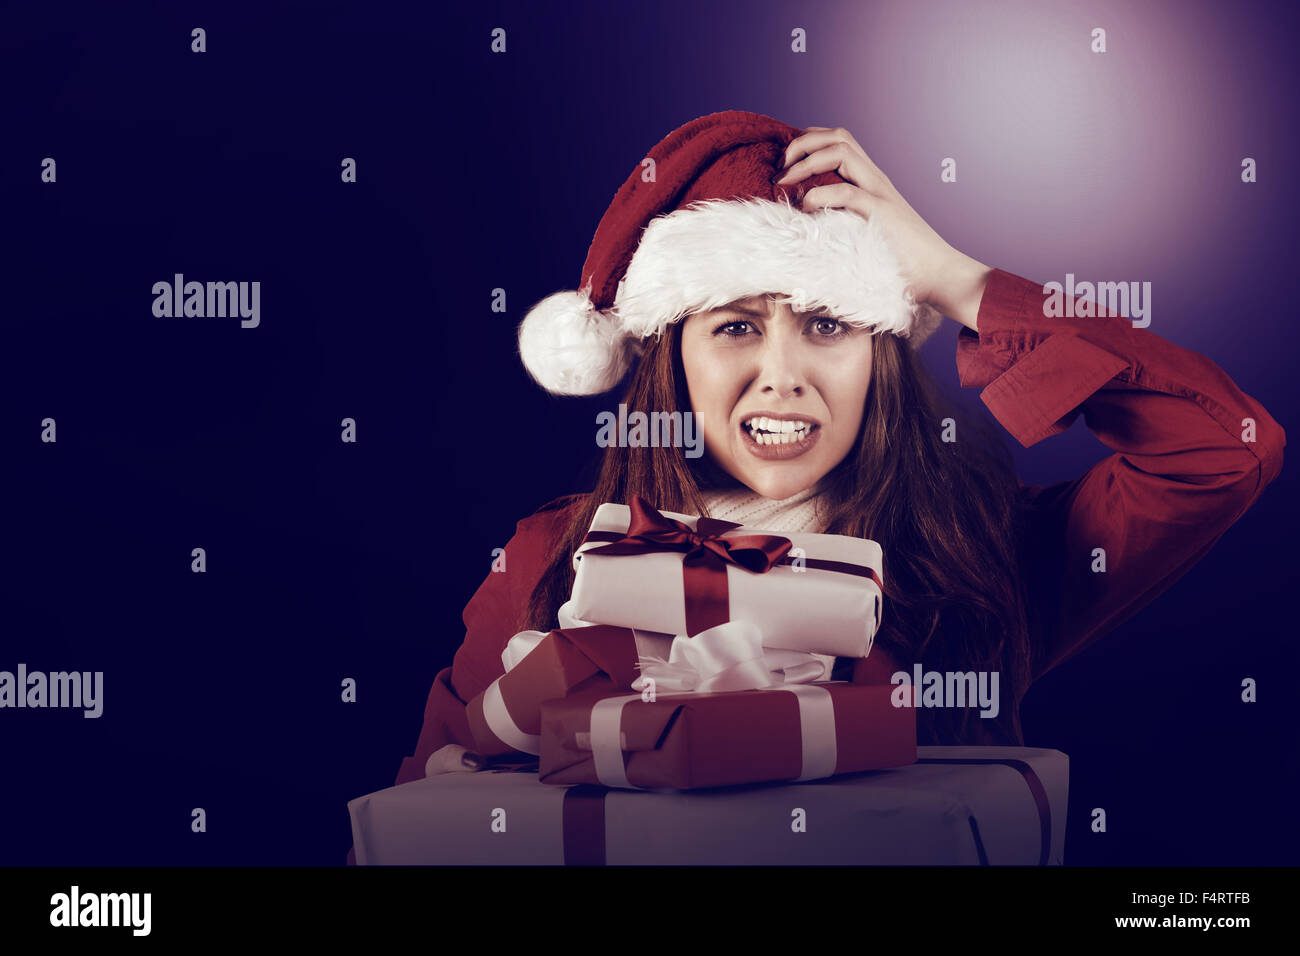 Festive stressed redhead holding gifts Stock Photo